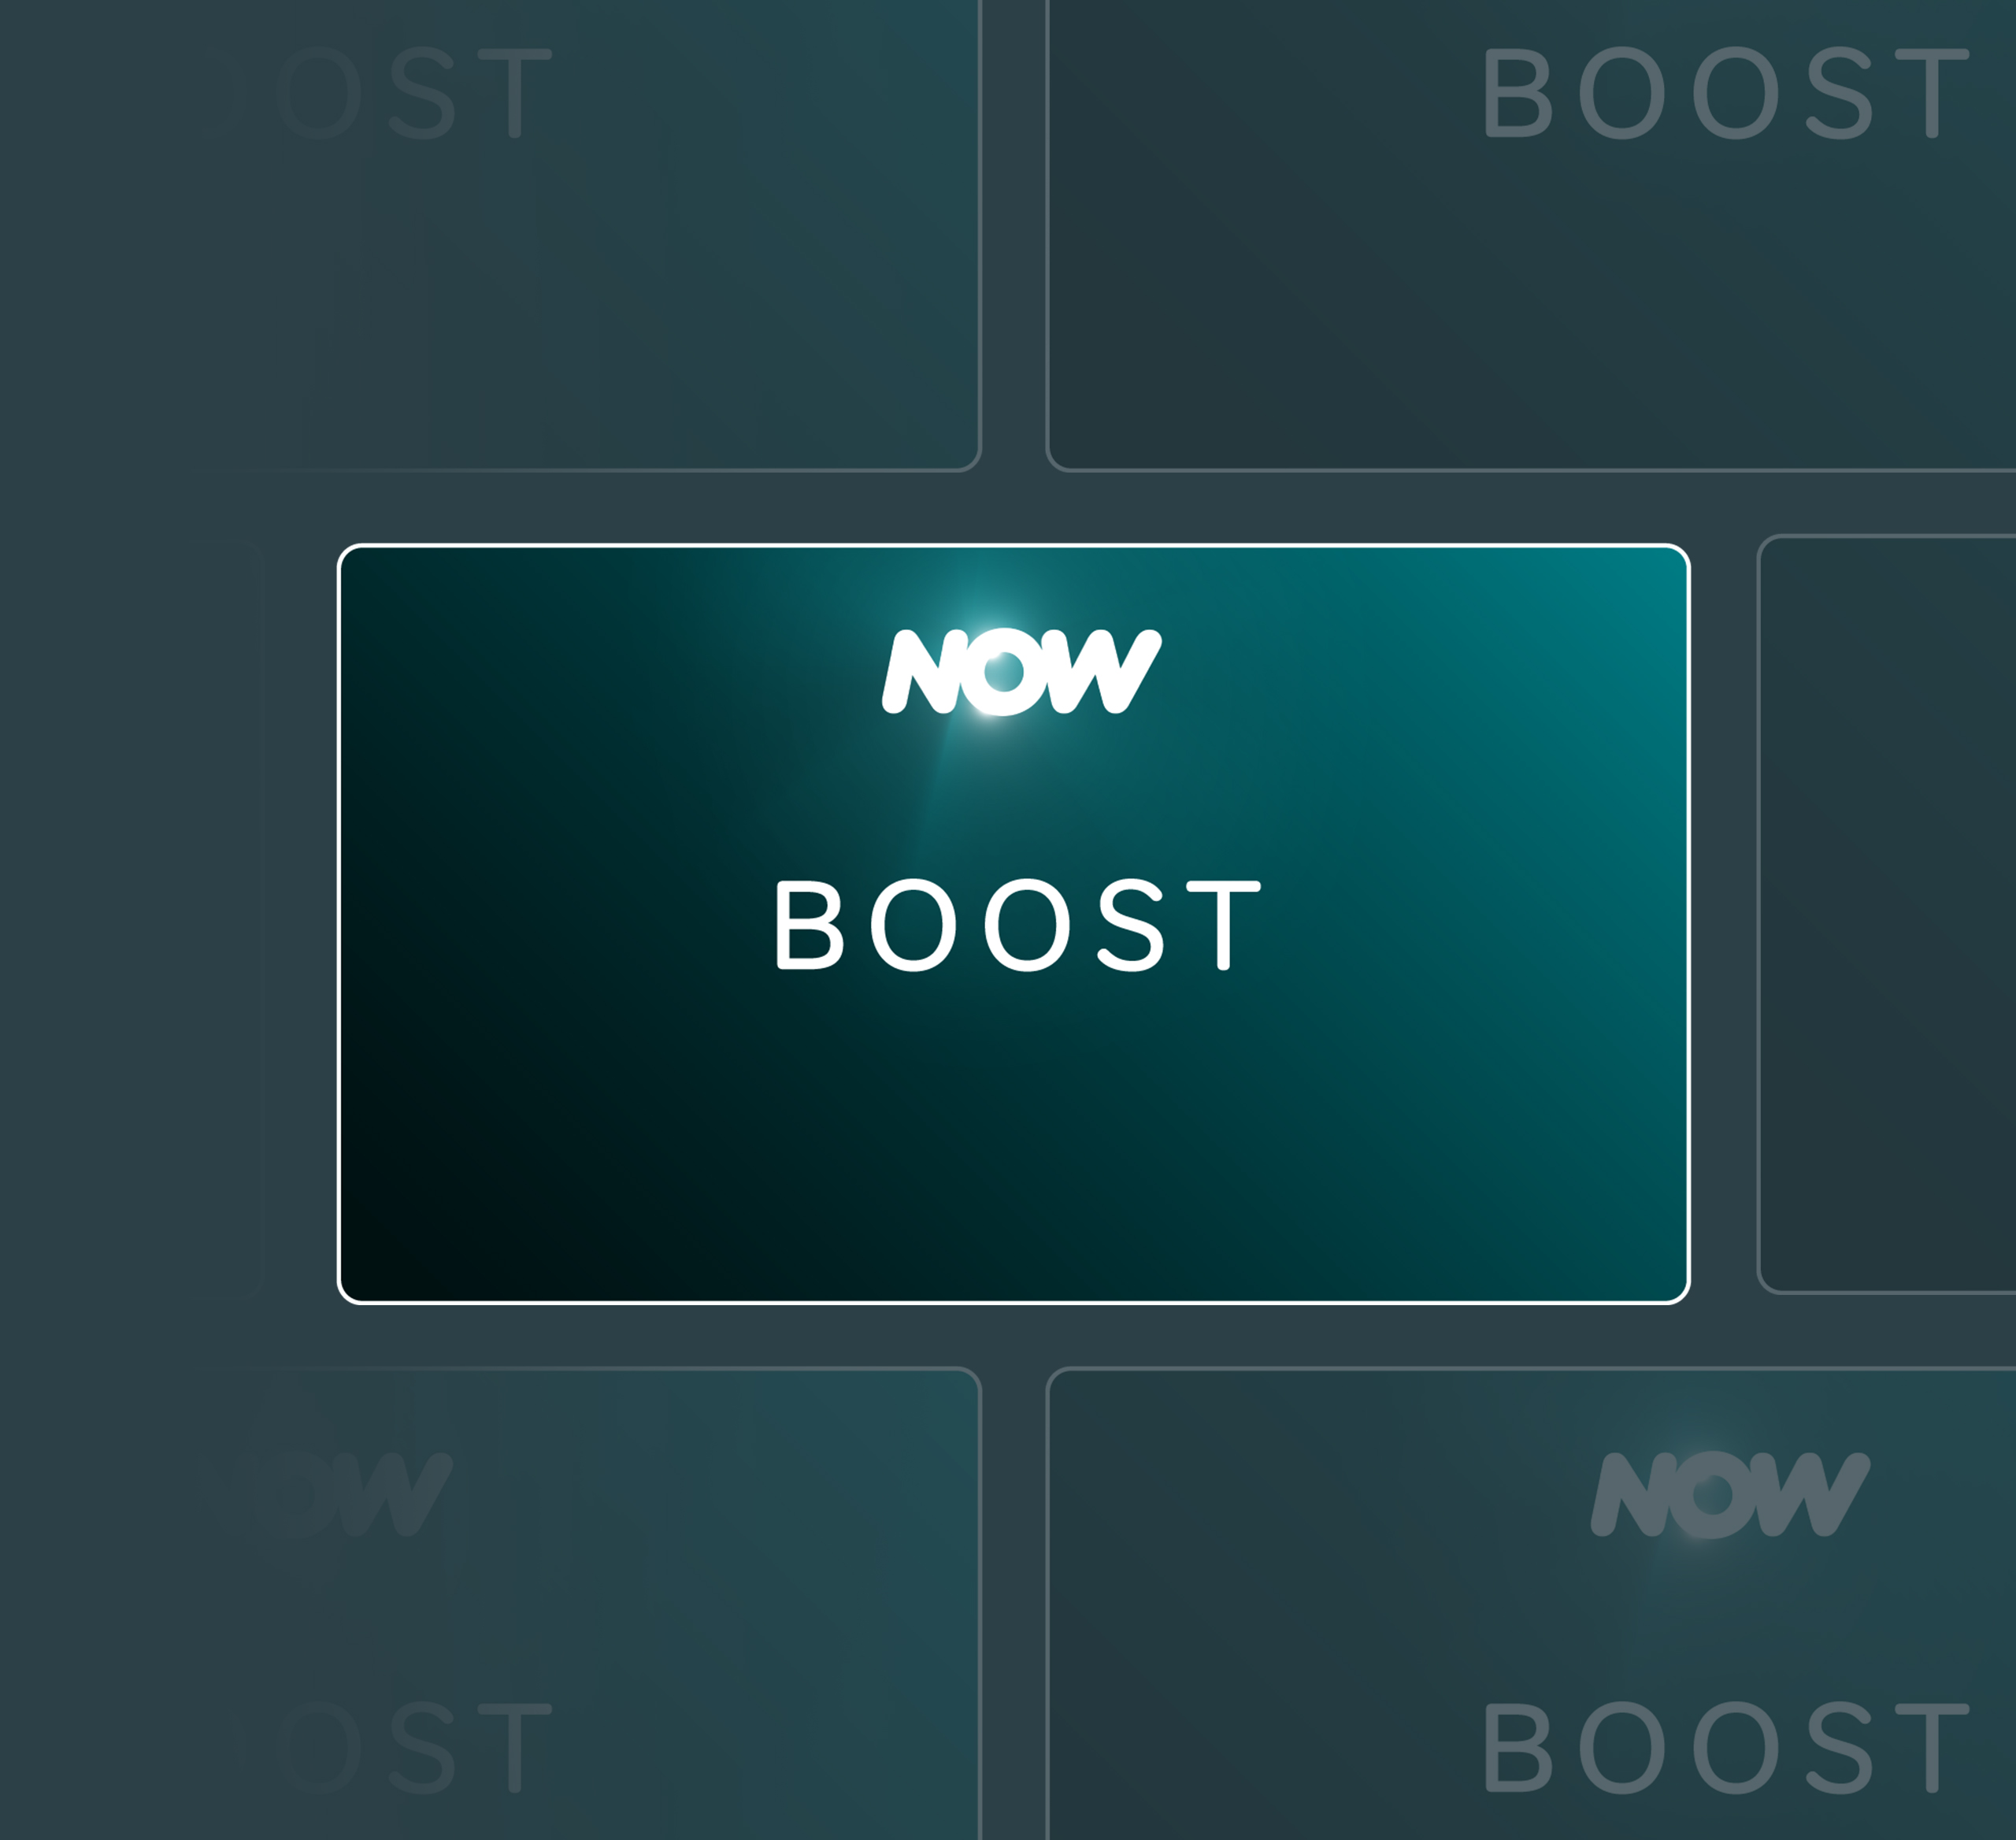 NOW Boost